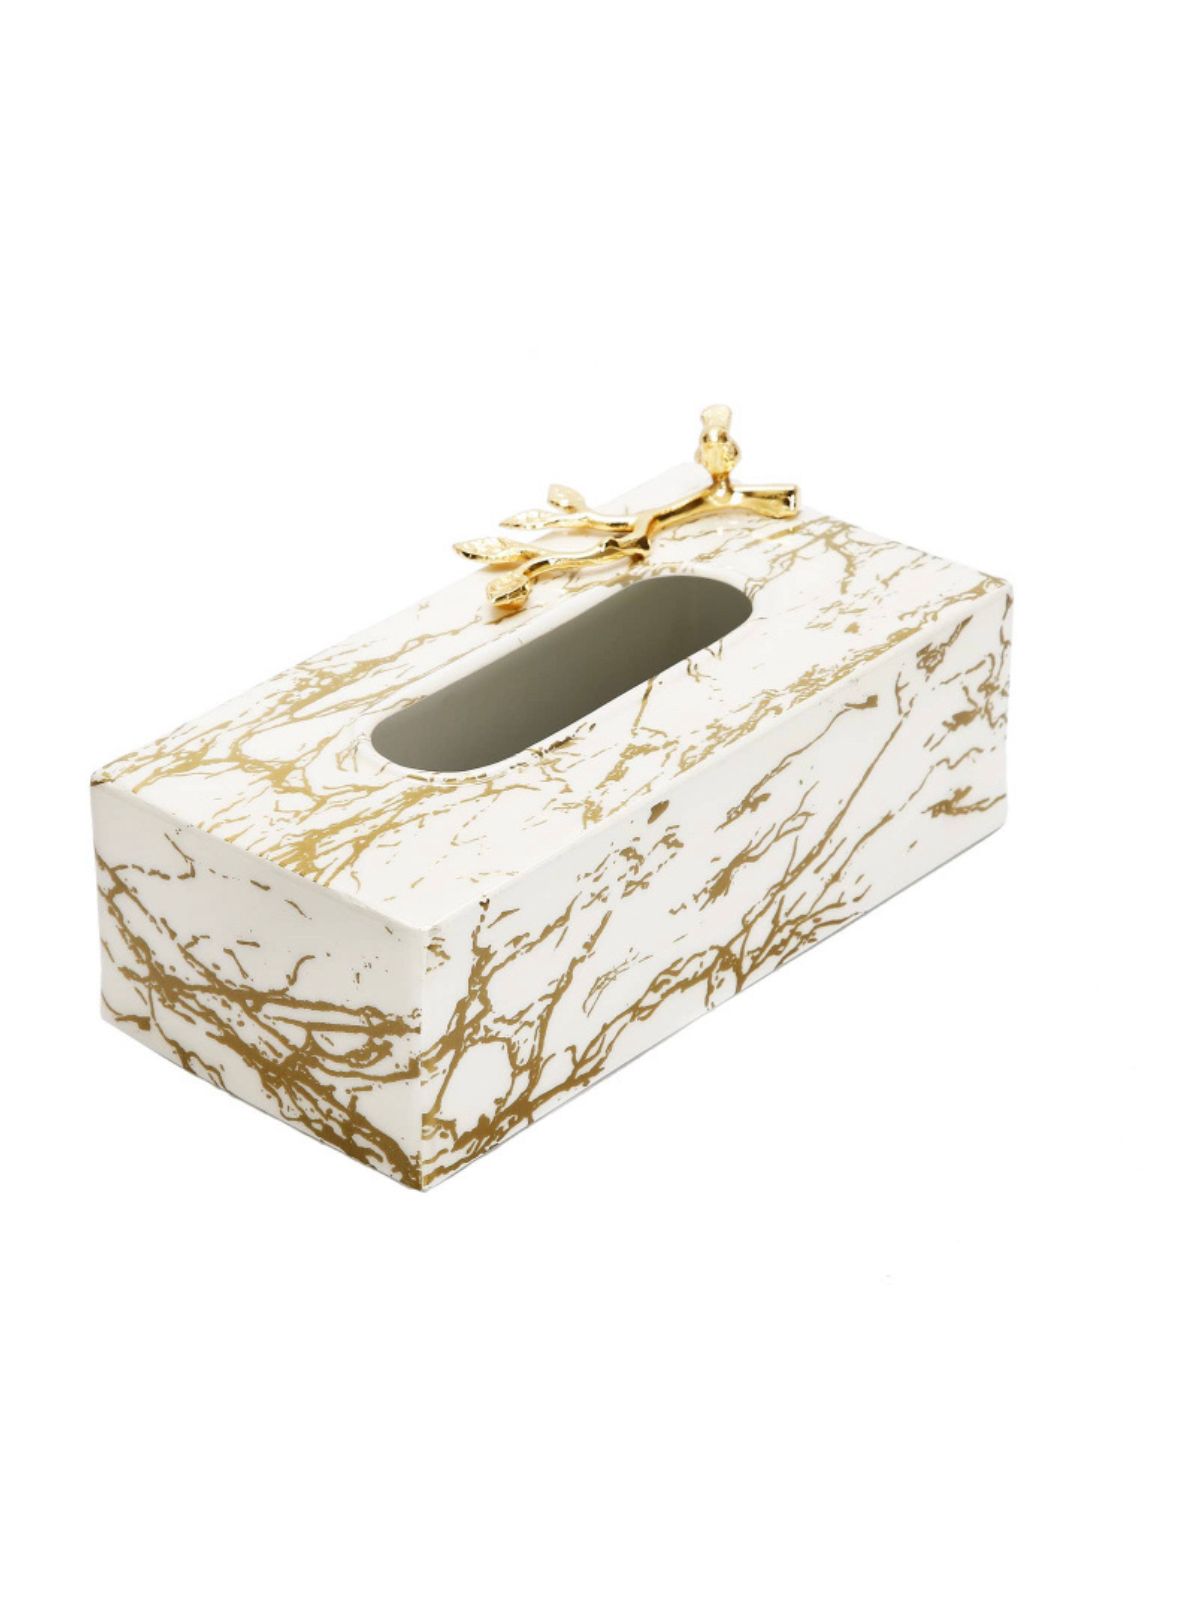 White and Gold Marble Designed Tissue Box with Gold Leaf and Bird Design.